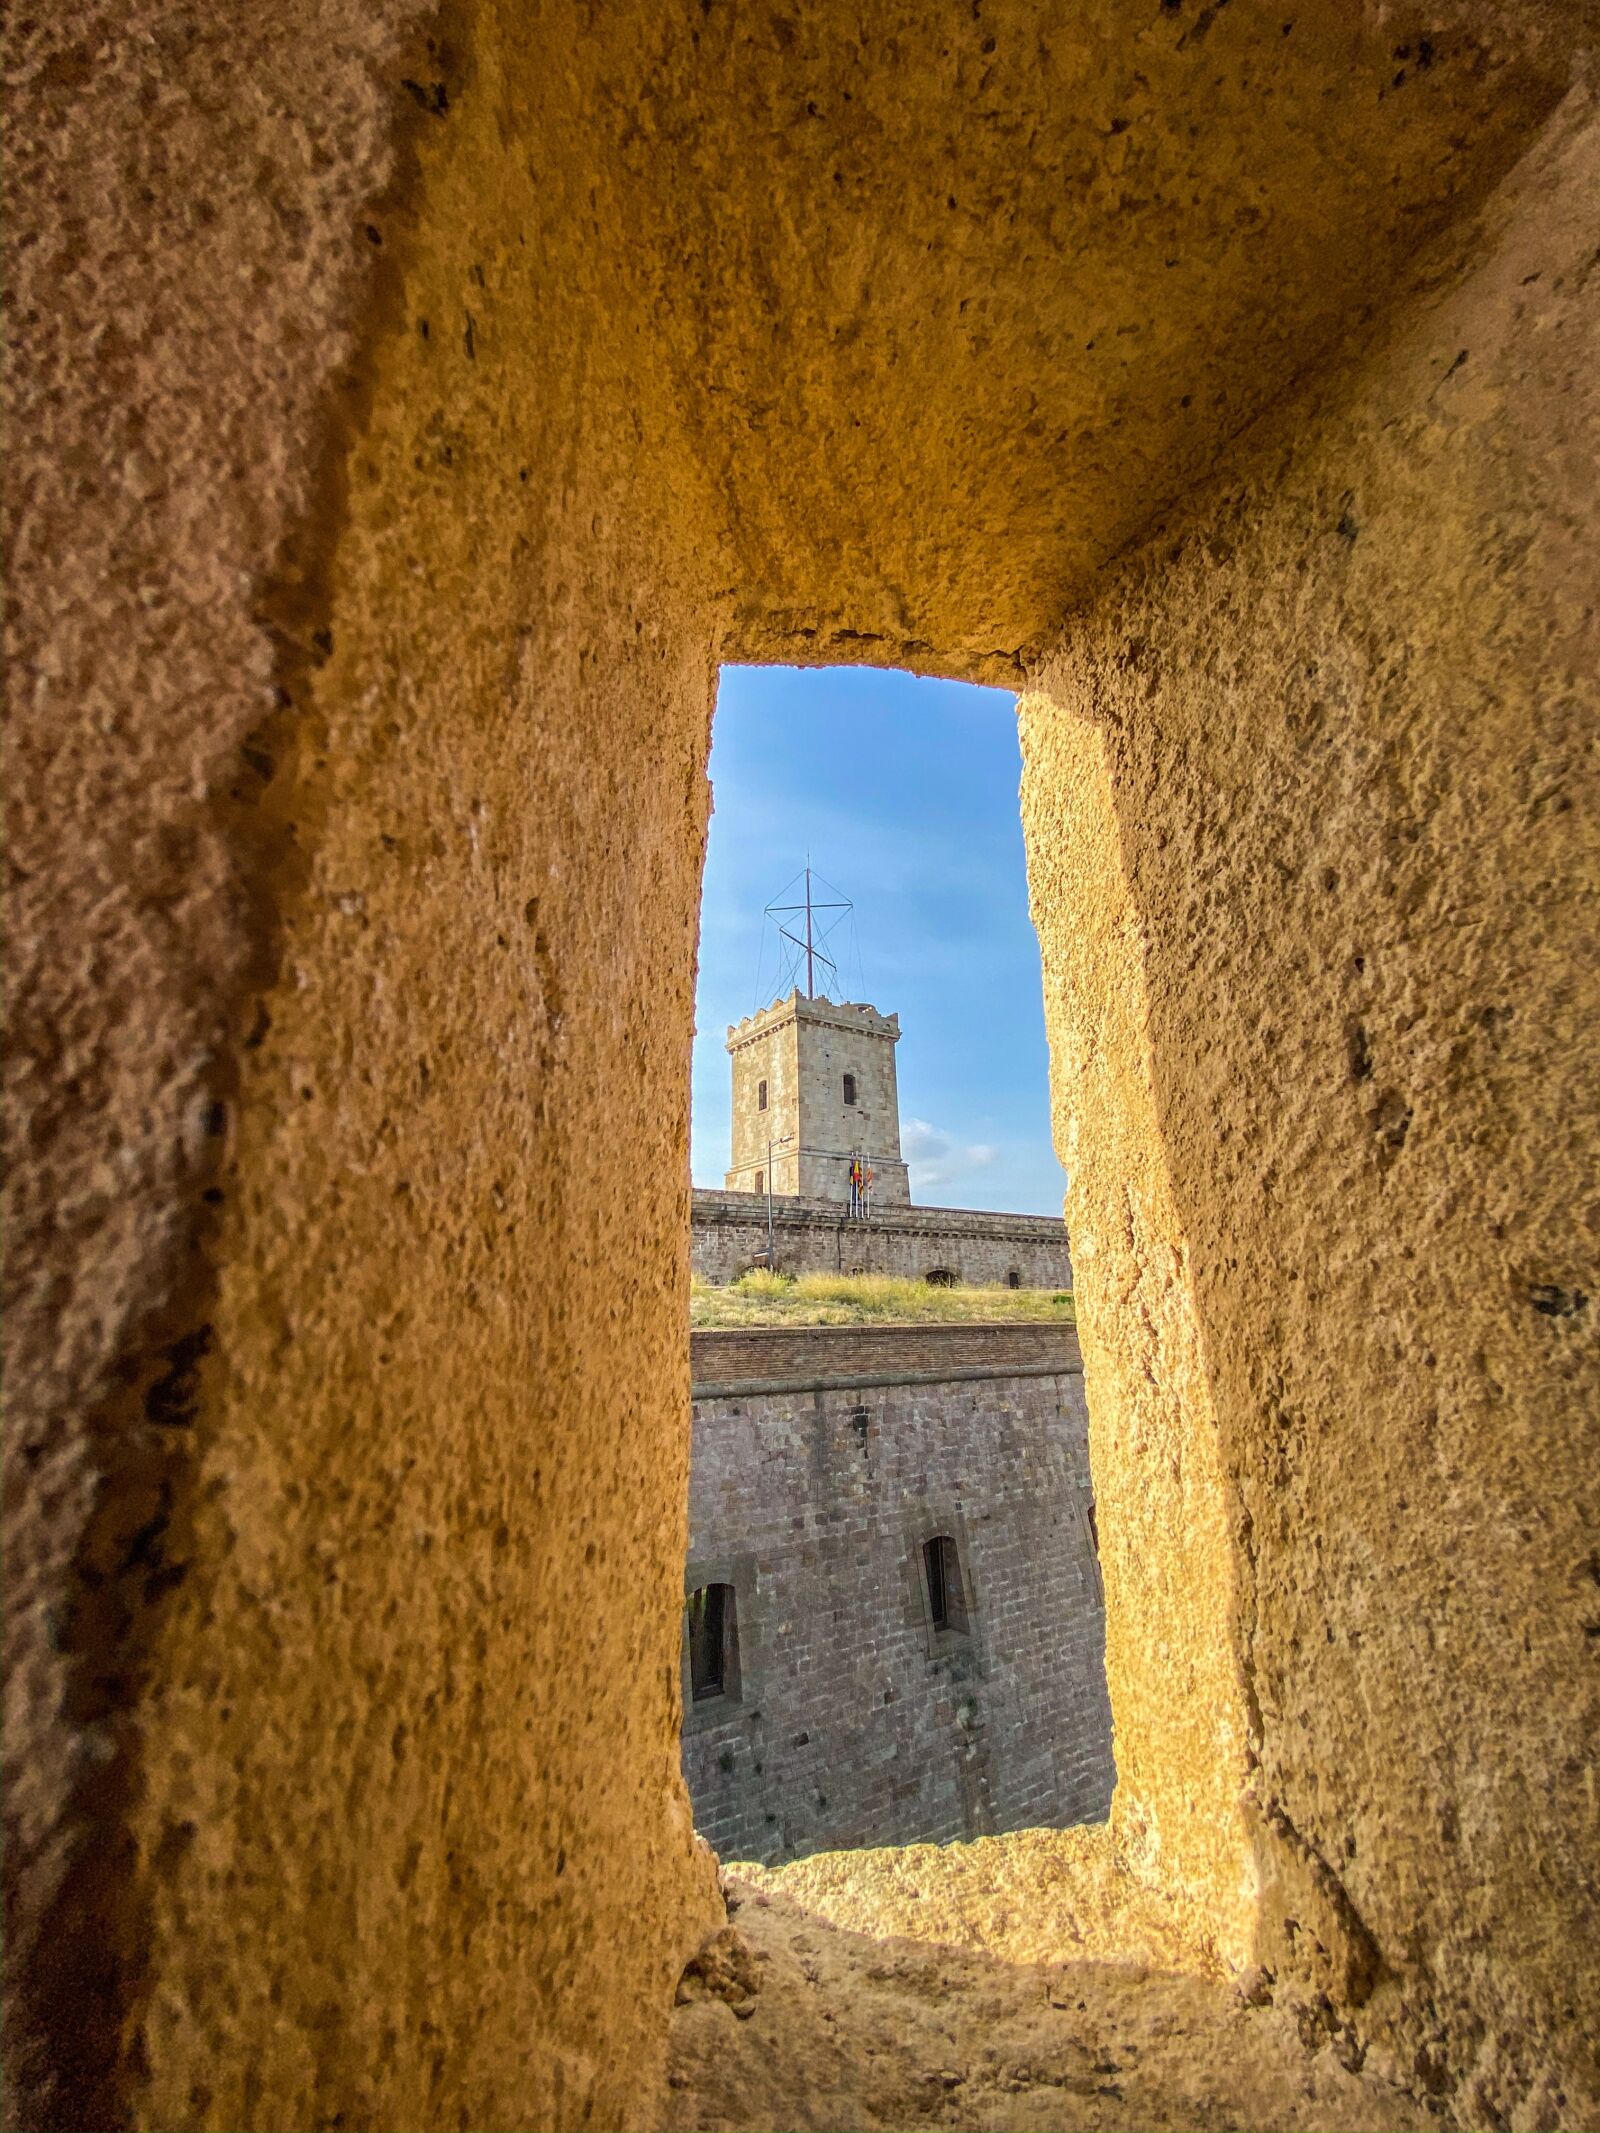 iPhone 11 Pro back triple camera 1.54mm f/2.4 sample photo. Barcelona, fortress, spain photography